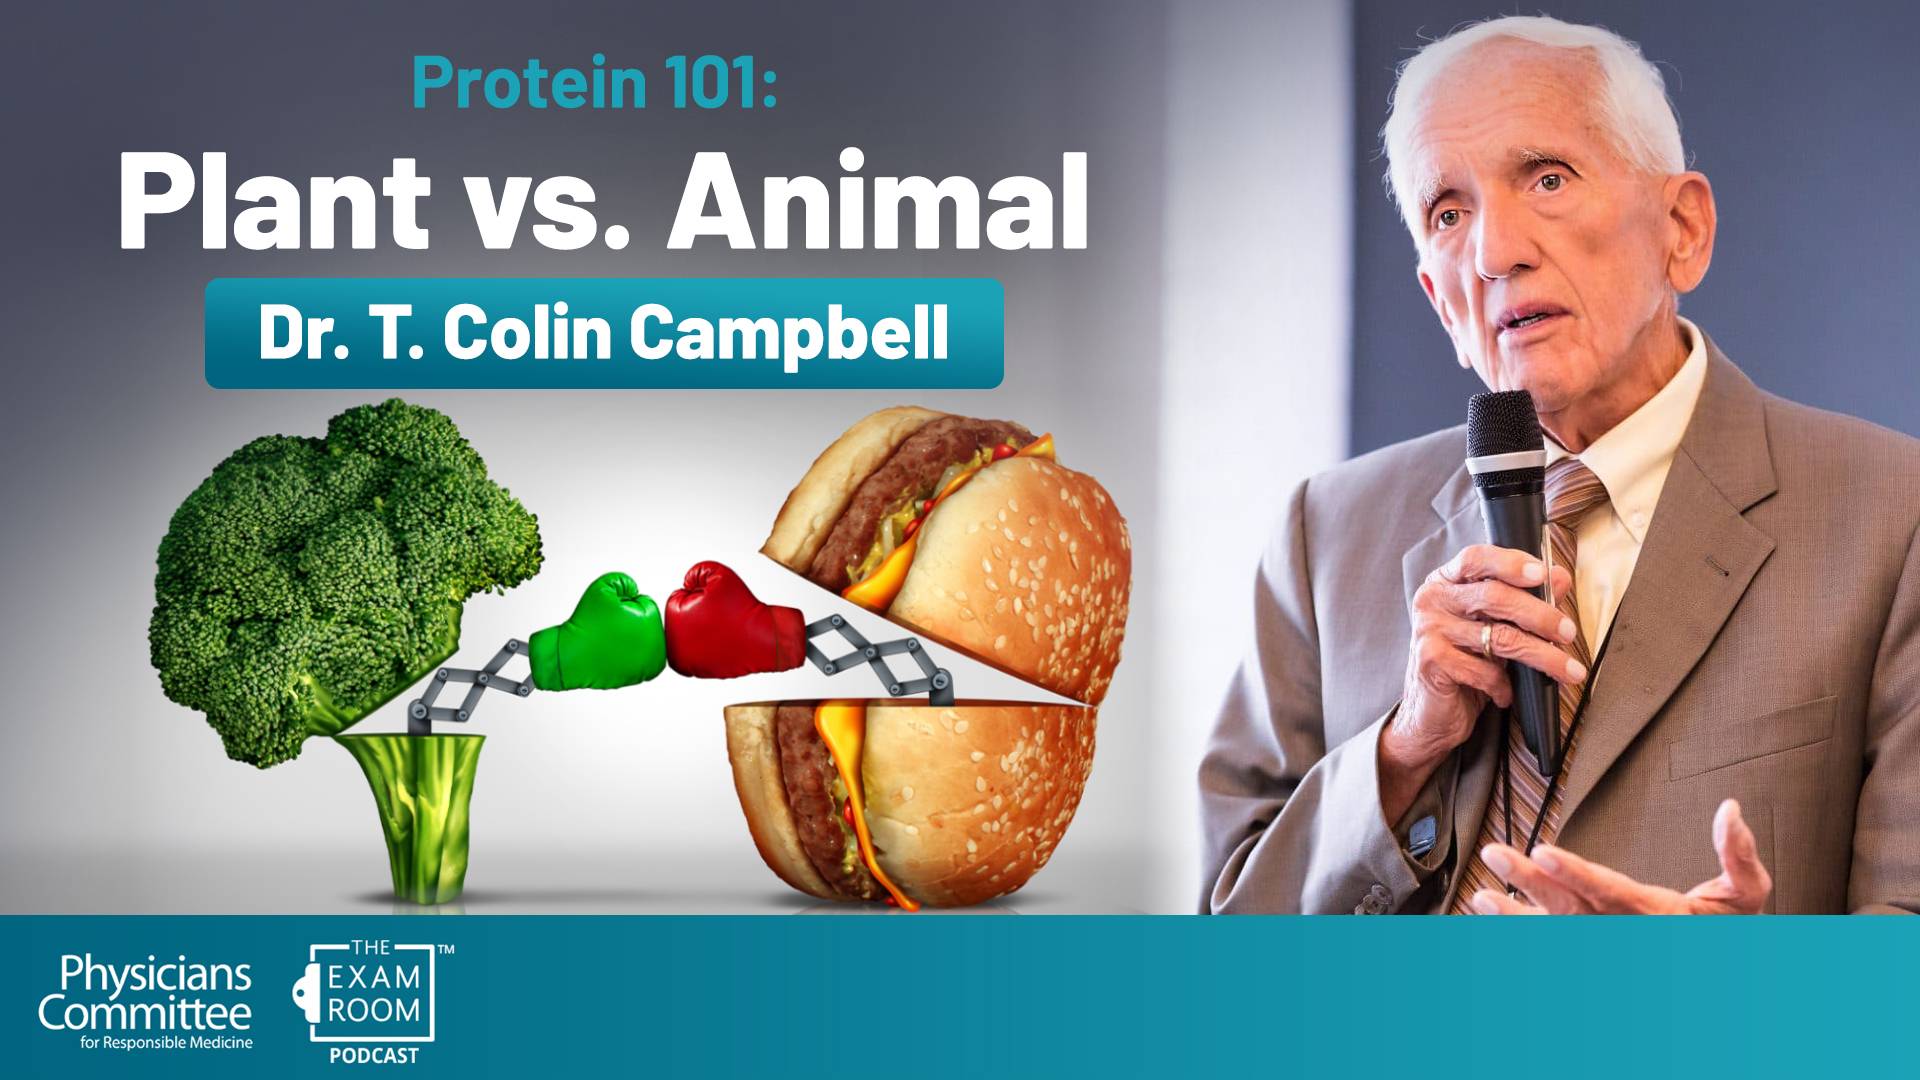 Dr. T. Colin Campbell: Are All Proteins Created Equally?